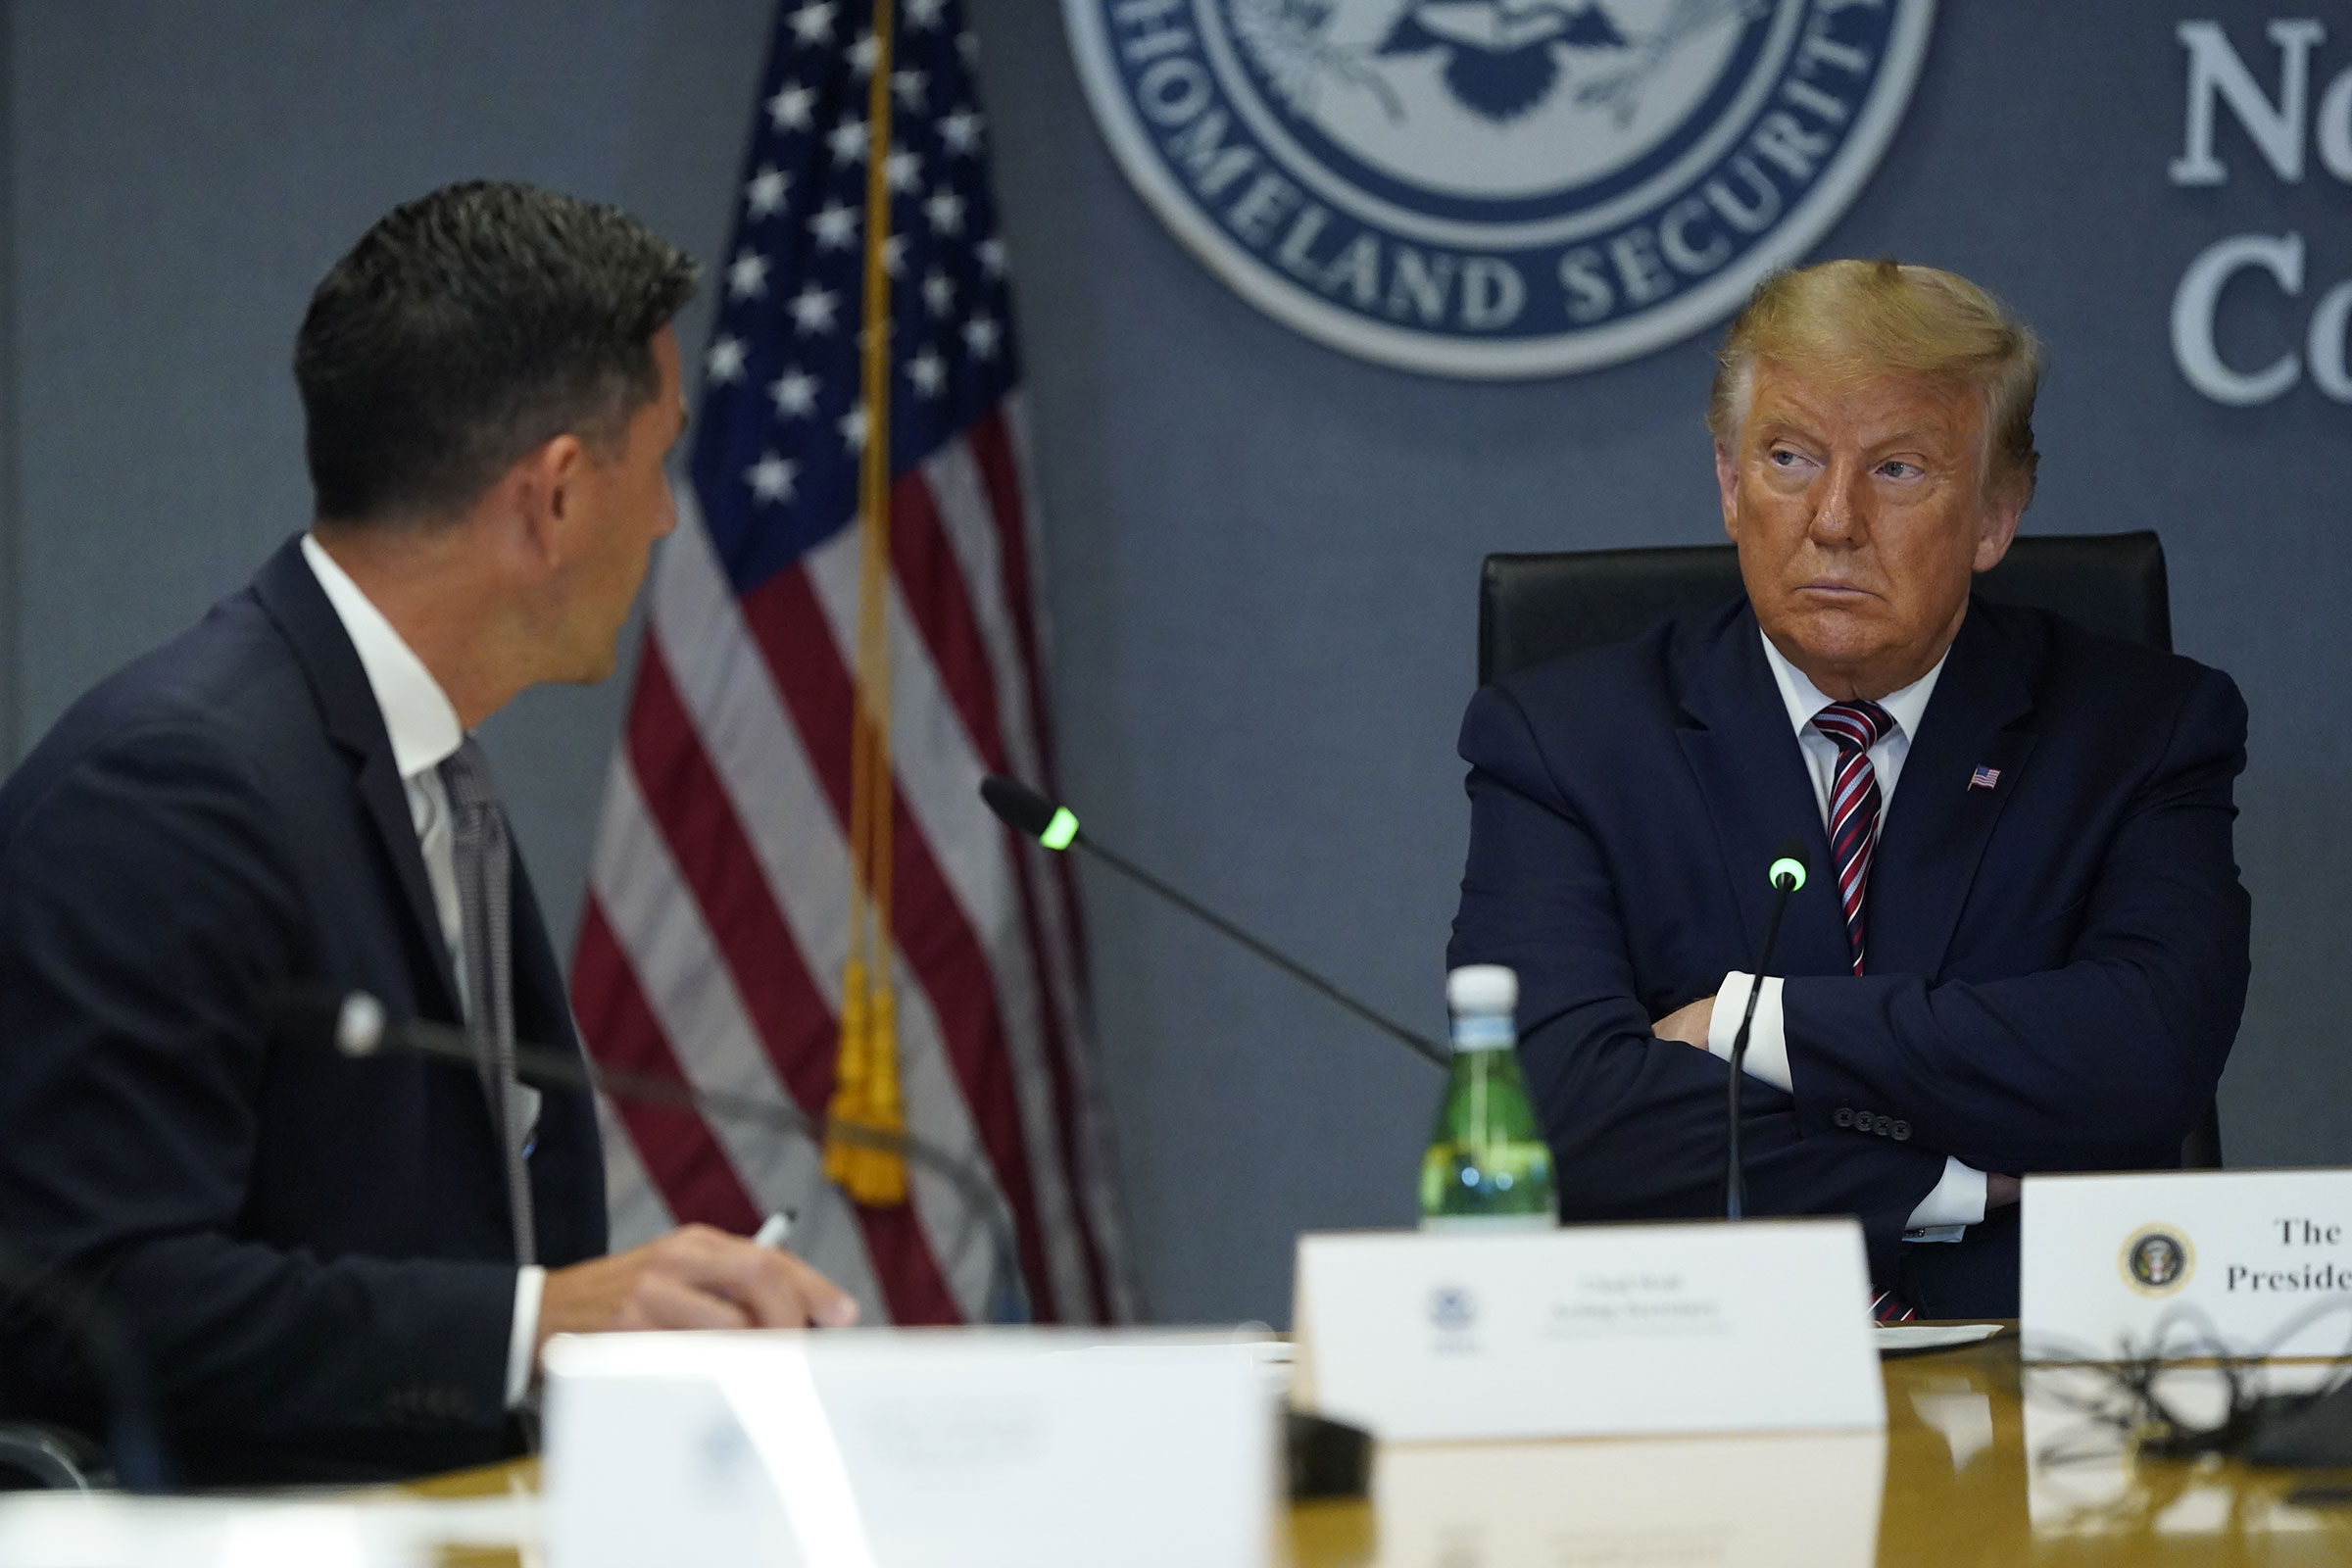 President Donald Trump listens while Chad Wolf, acting secretary of the Department of Homeland Security speaks during a meeting at FEMA headquarters in Washington on Aug. 27, 2020. (Erin Scott—Polaris/Bloomberg/Getty Images)